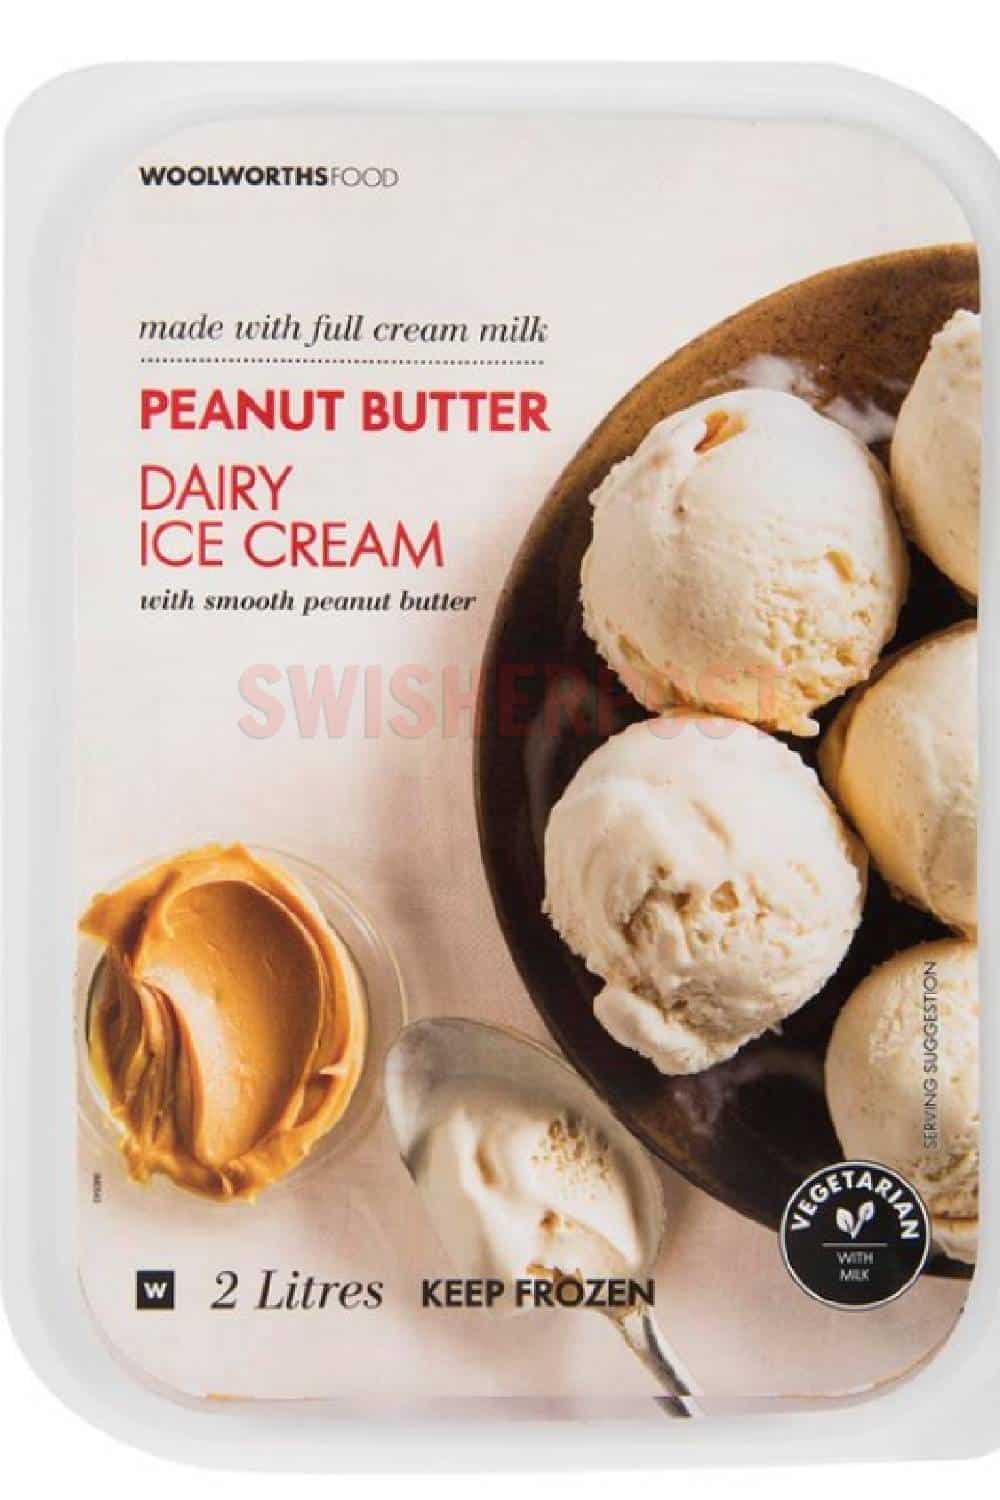 woolworths peanut butter ice cream recall